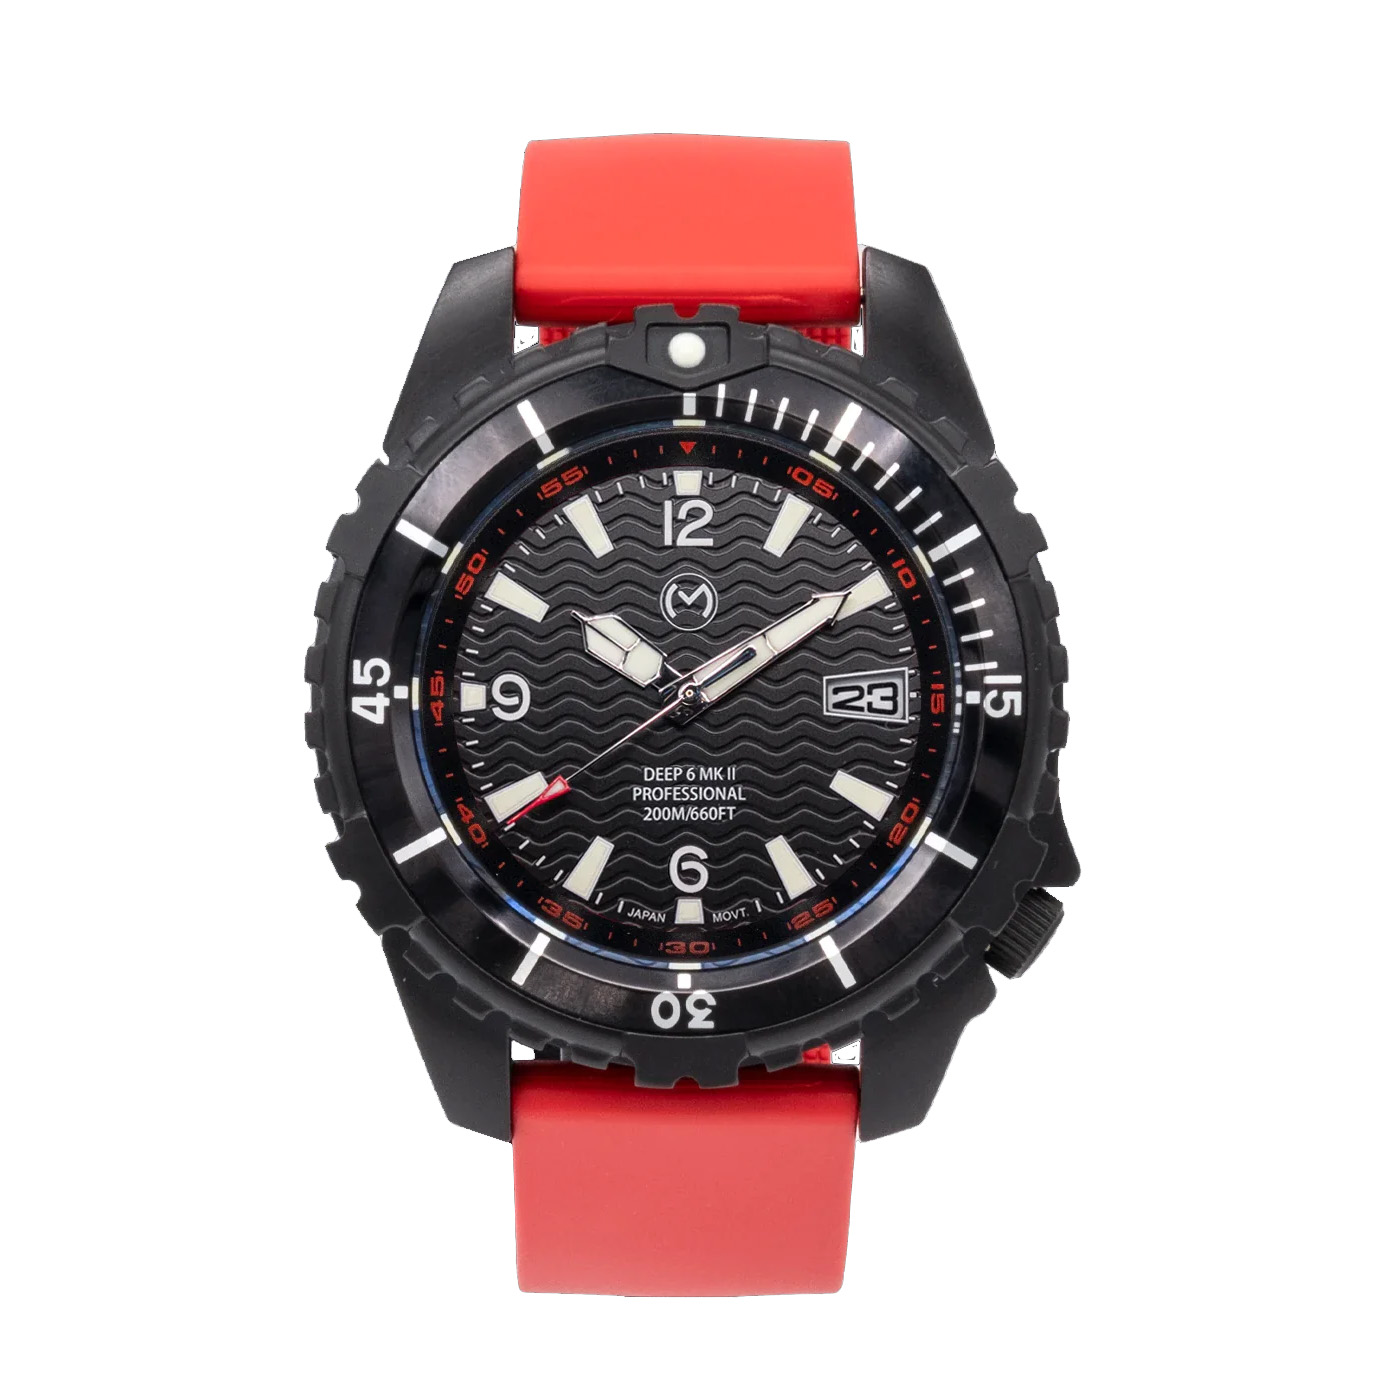 Momentum Deep 6 MK II Black-Ion Dive Watch (47mm) Red Goma Rubber